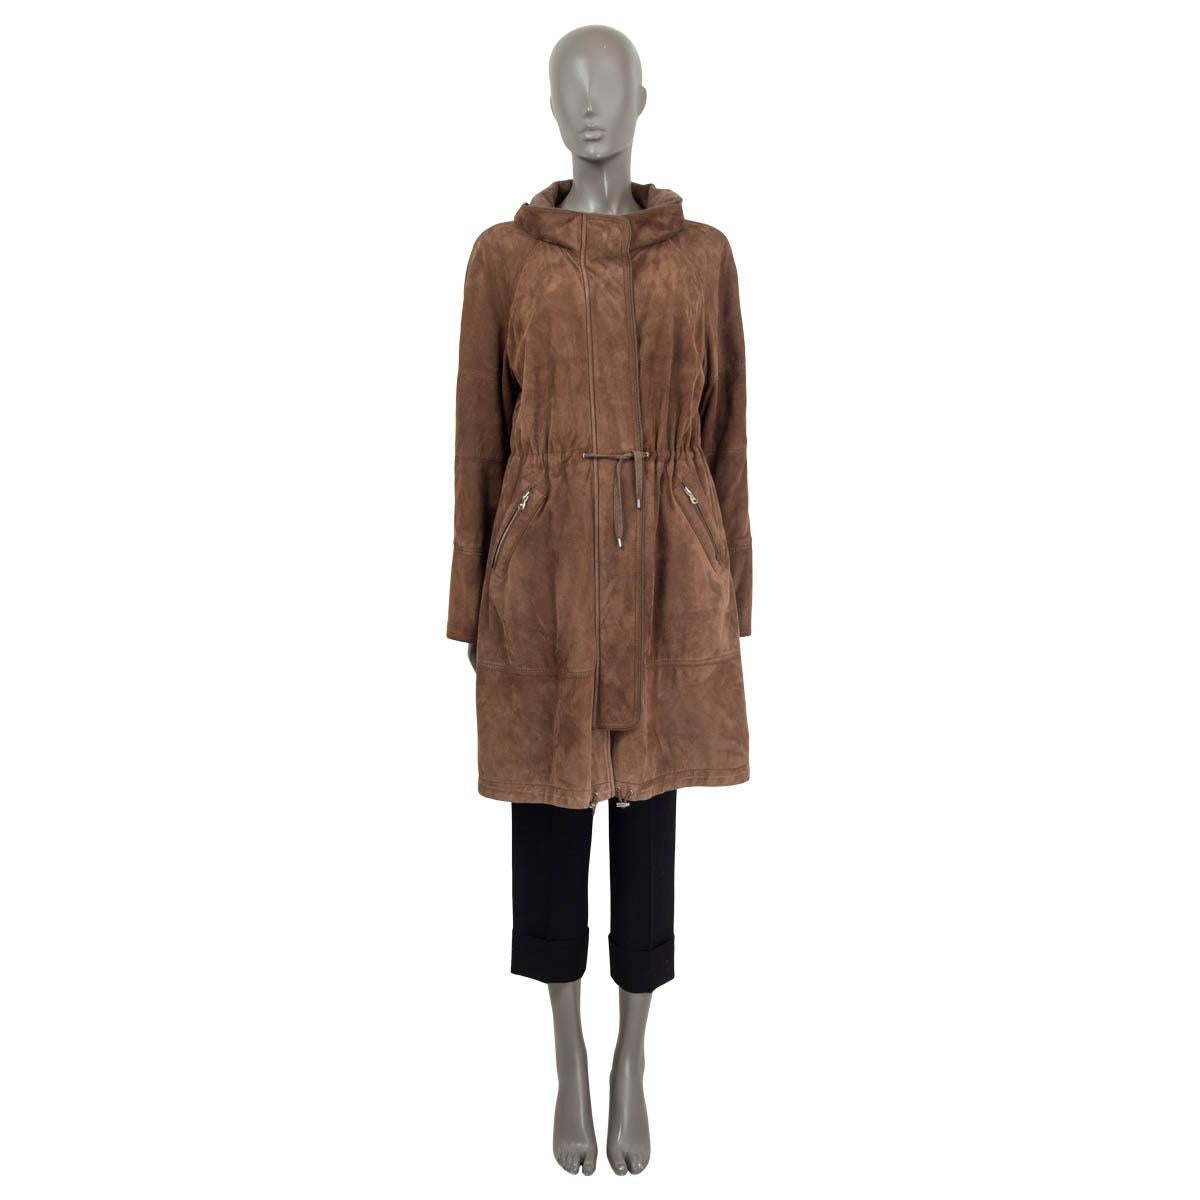 100% authentic Brunello Cucinelli high neck coat in brown suede leather (100%). Features long raglan sleeves (sleeve measurements taken from the) and two zip pockets on the front. Has two drawstring closures and opens with concealed buttons and a